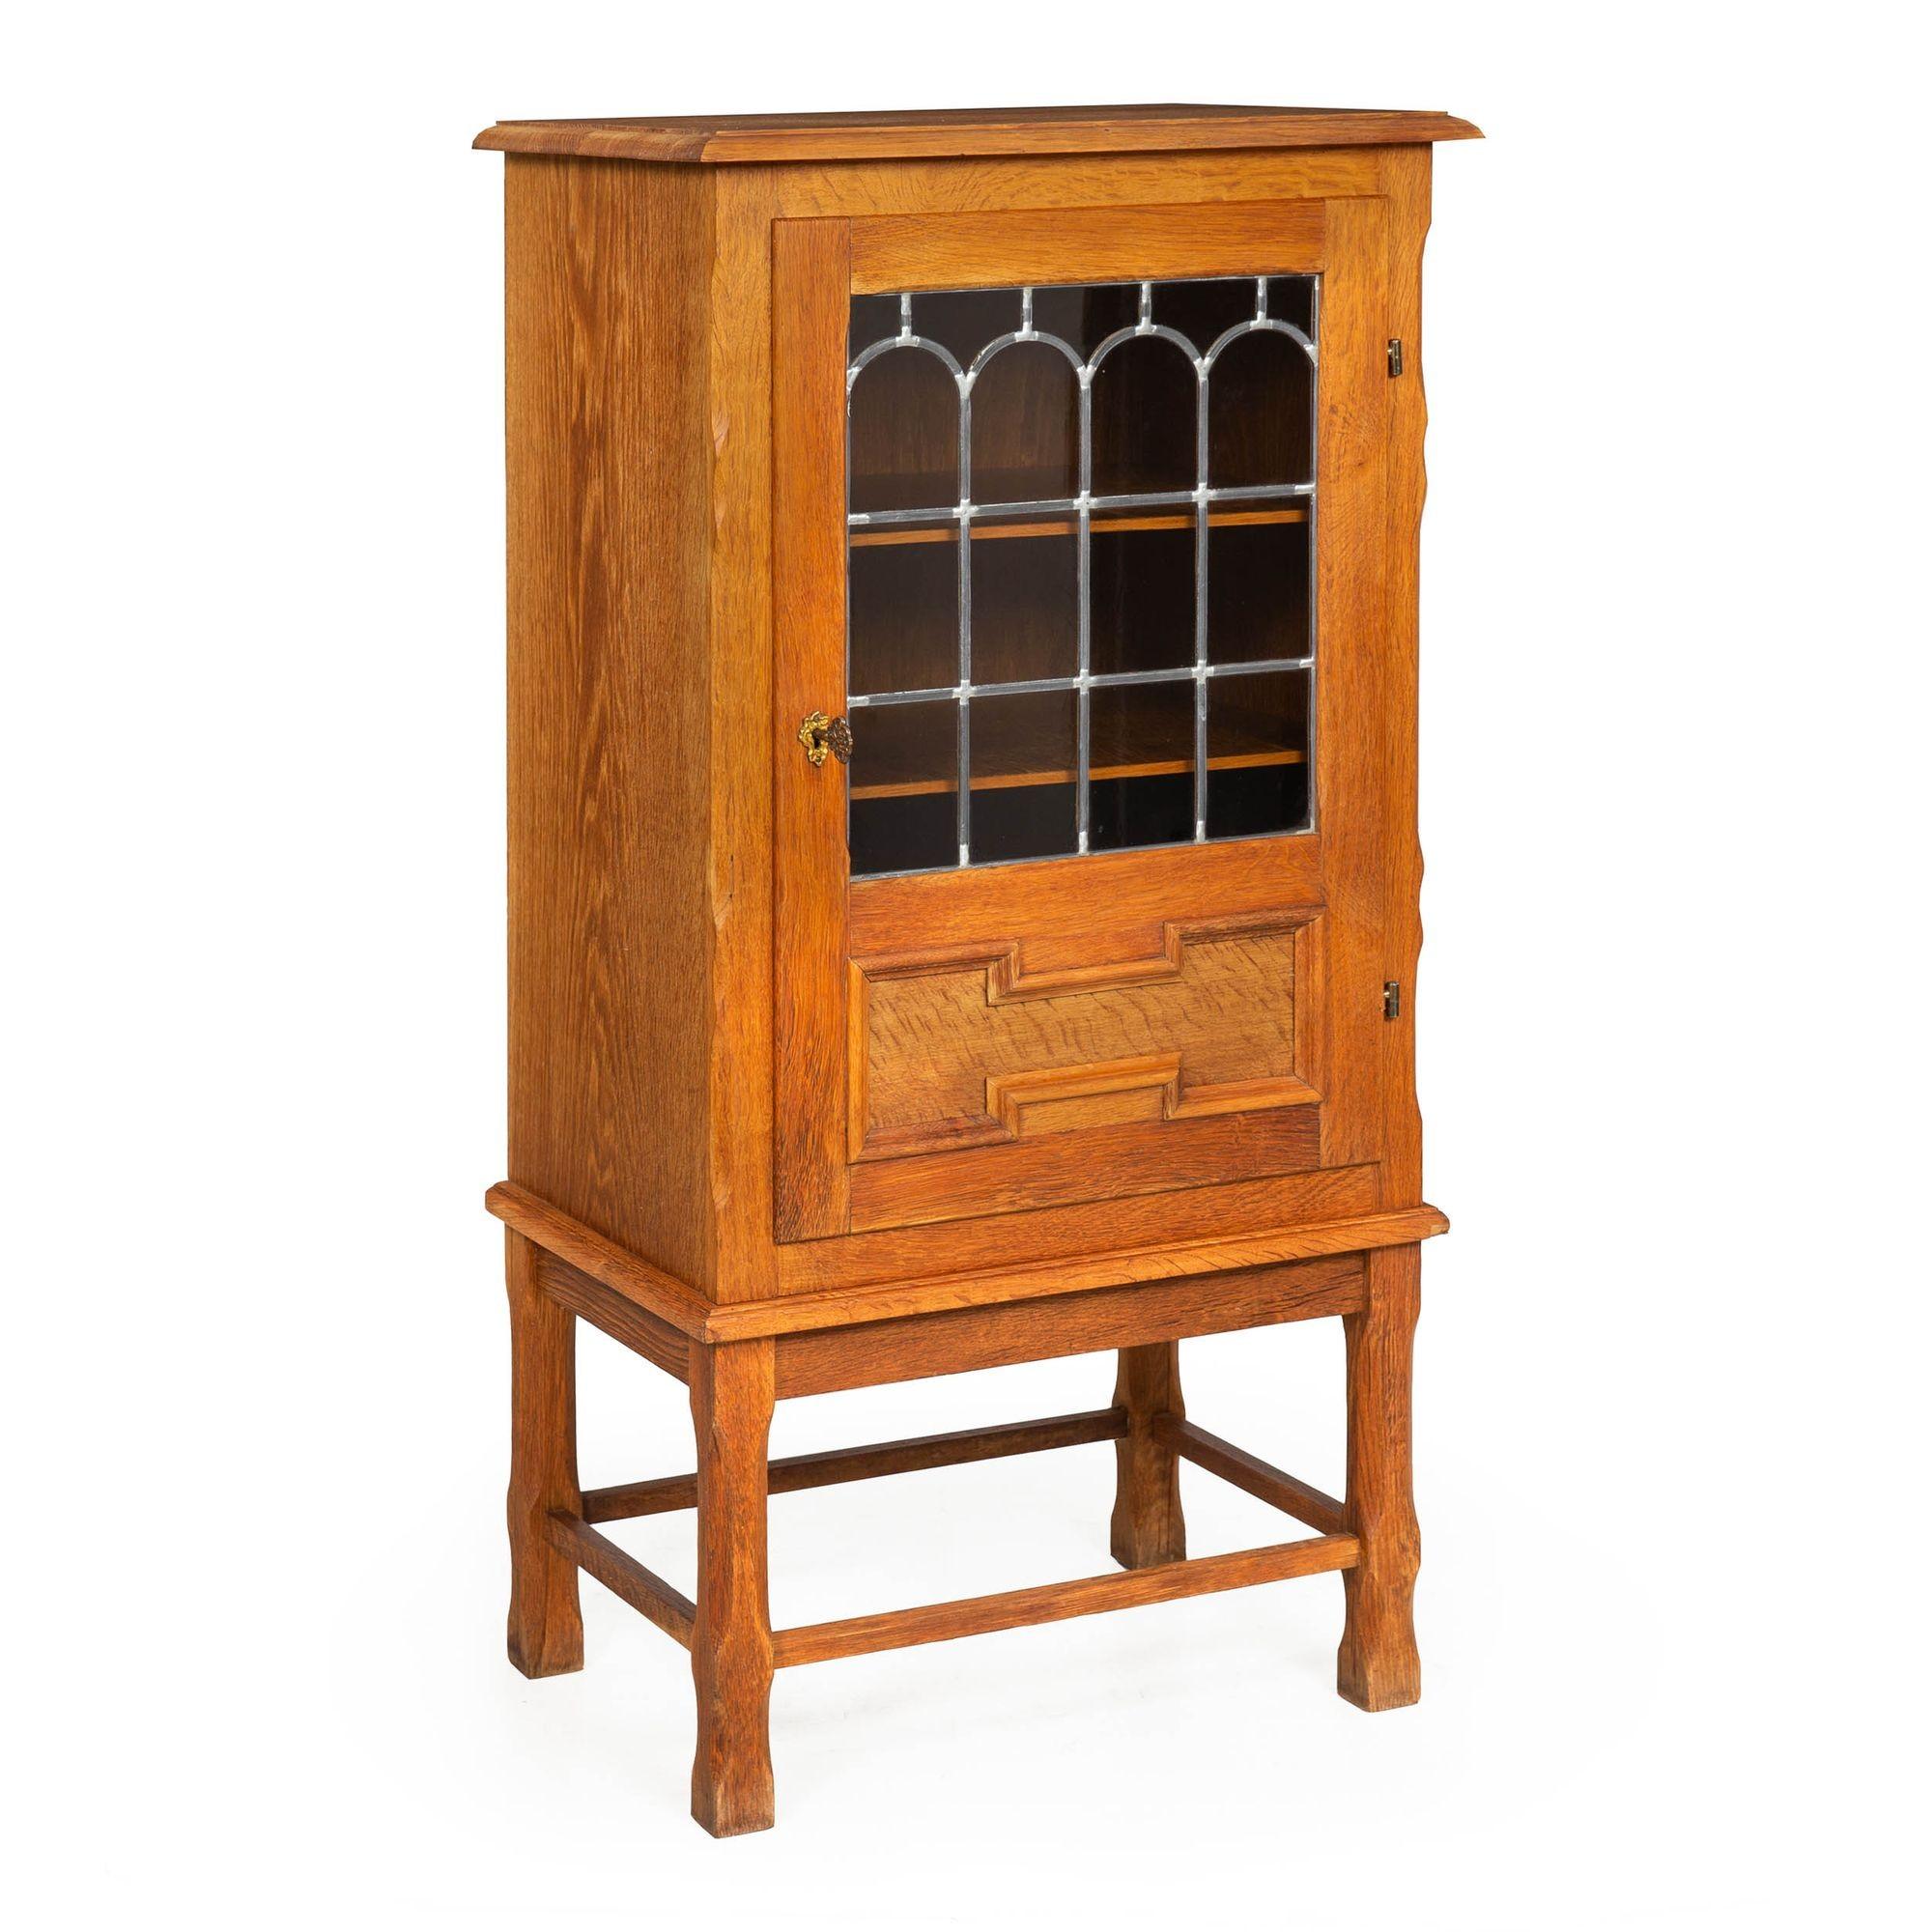 SCANDINAVIAN MODERN PATINATED OAK DISPLAY CABINET
Probably Danish, circa 1950s  unmarked
Item # 211RIP29L 

A striking Scandinavian Modern cabinet executed in patinated and oiled oak and oak veneers, it features a single glazed door with arched